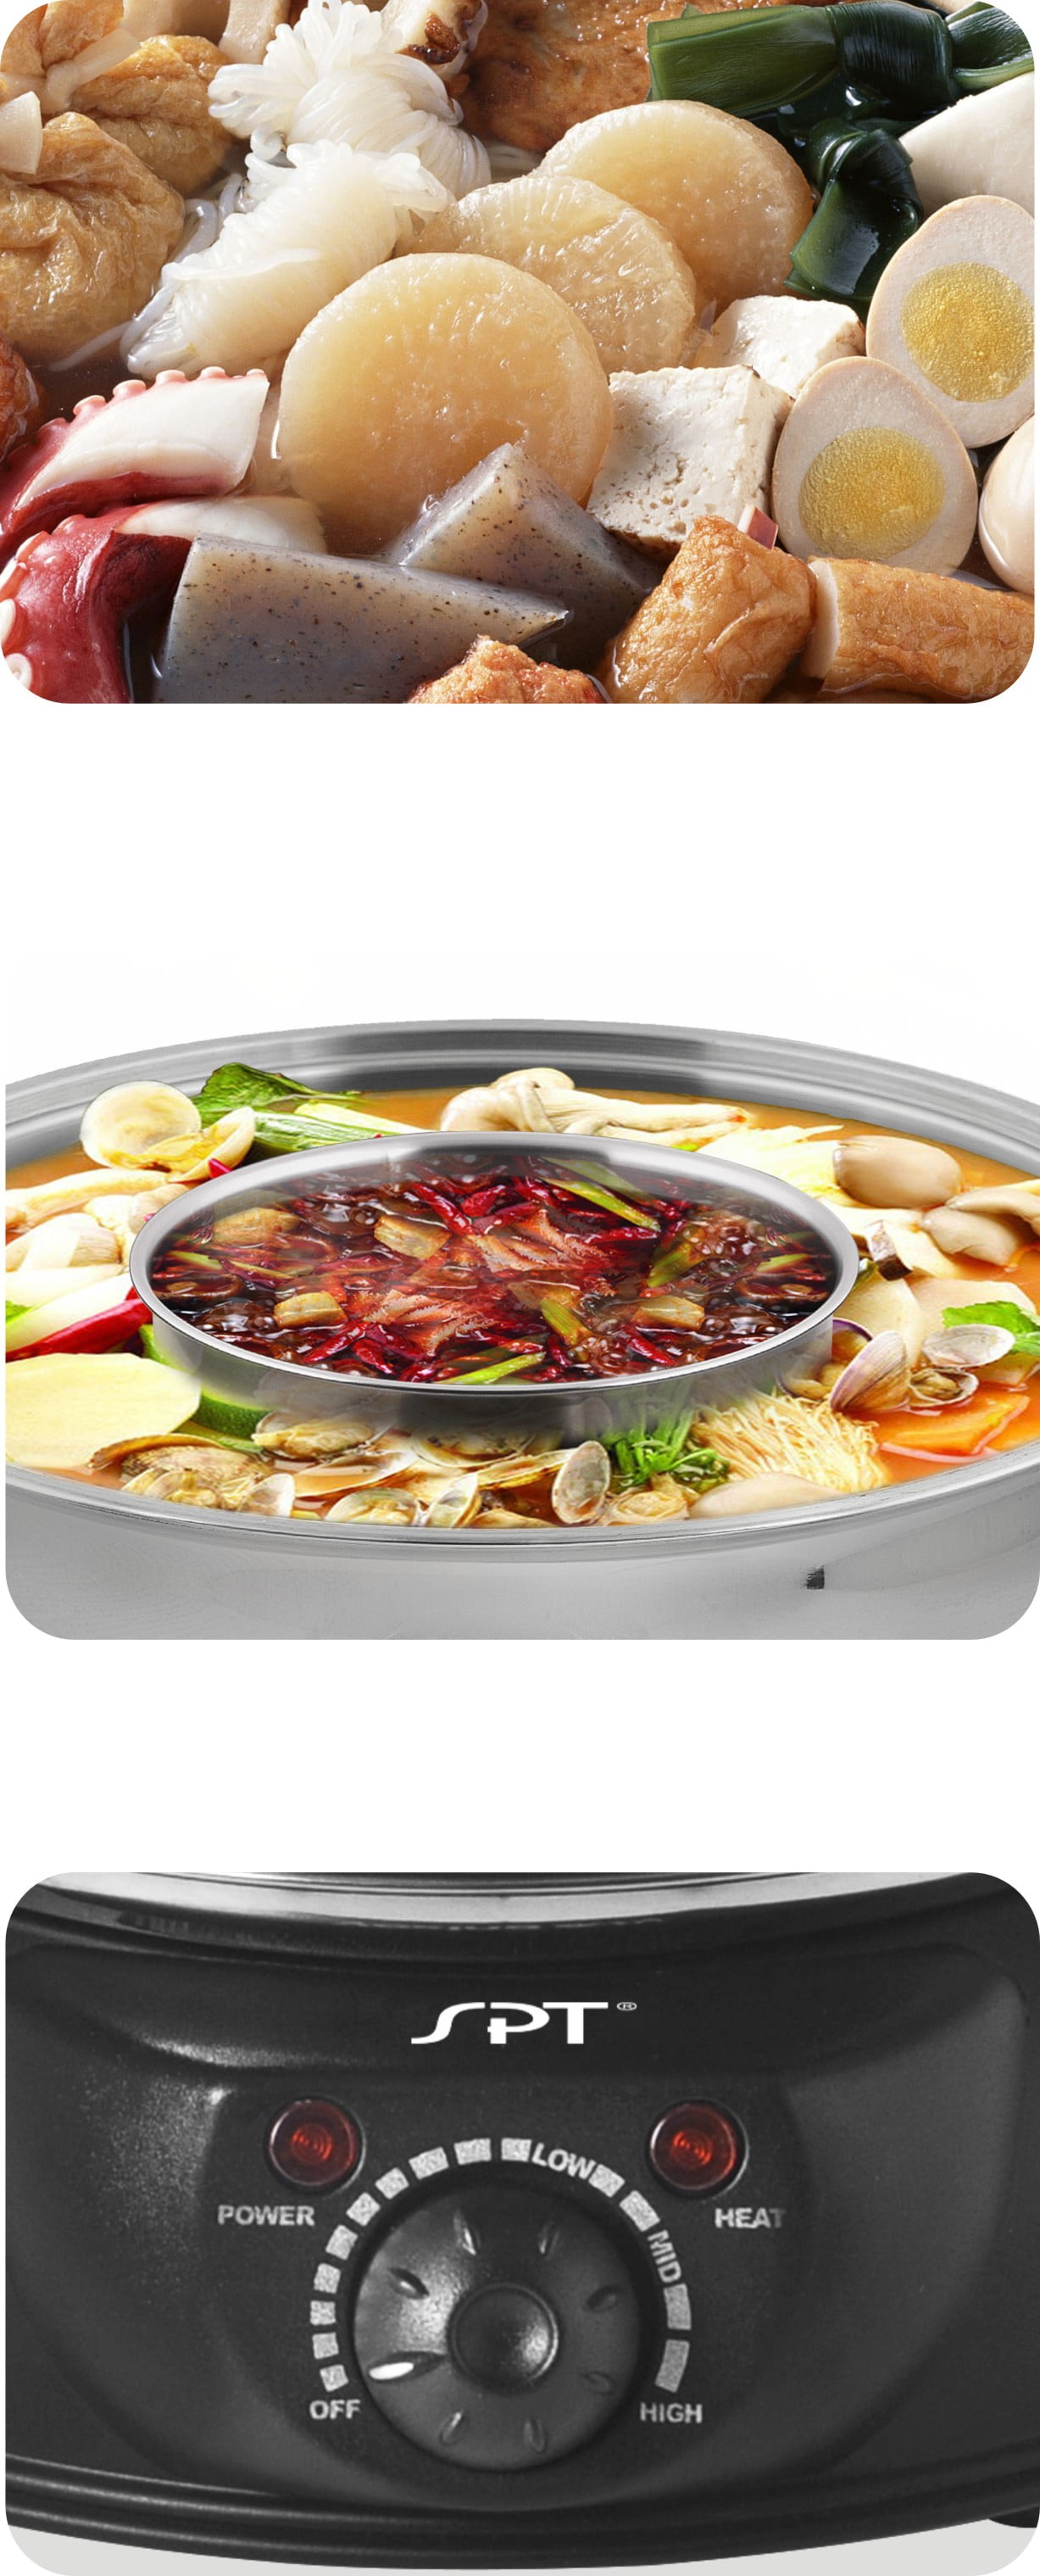 【Low Price Guarantee】5-Qt Stainless Steel Electric Shabu Hot Pot with Lid  ASP-610, 1 Year Mfgr Warranty